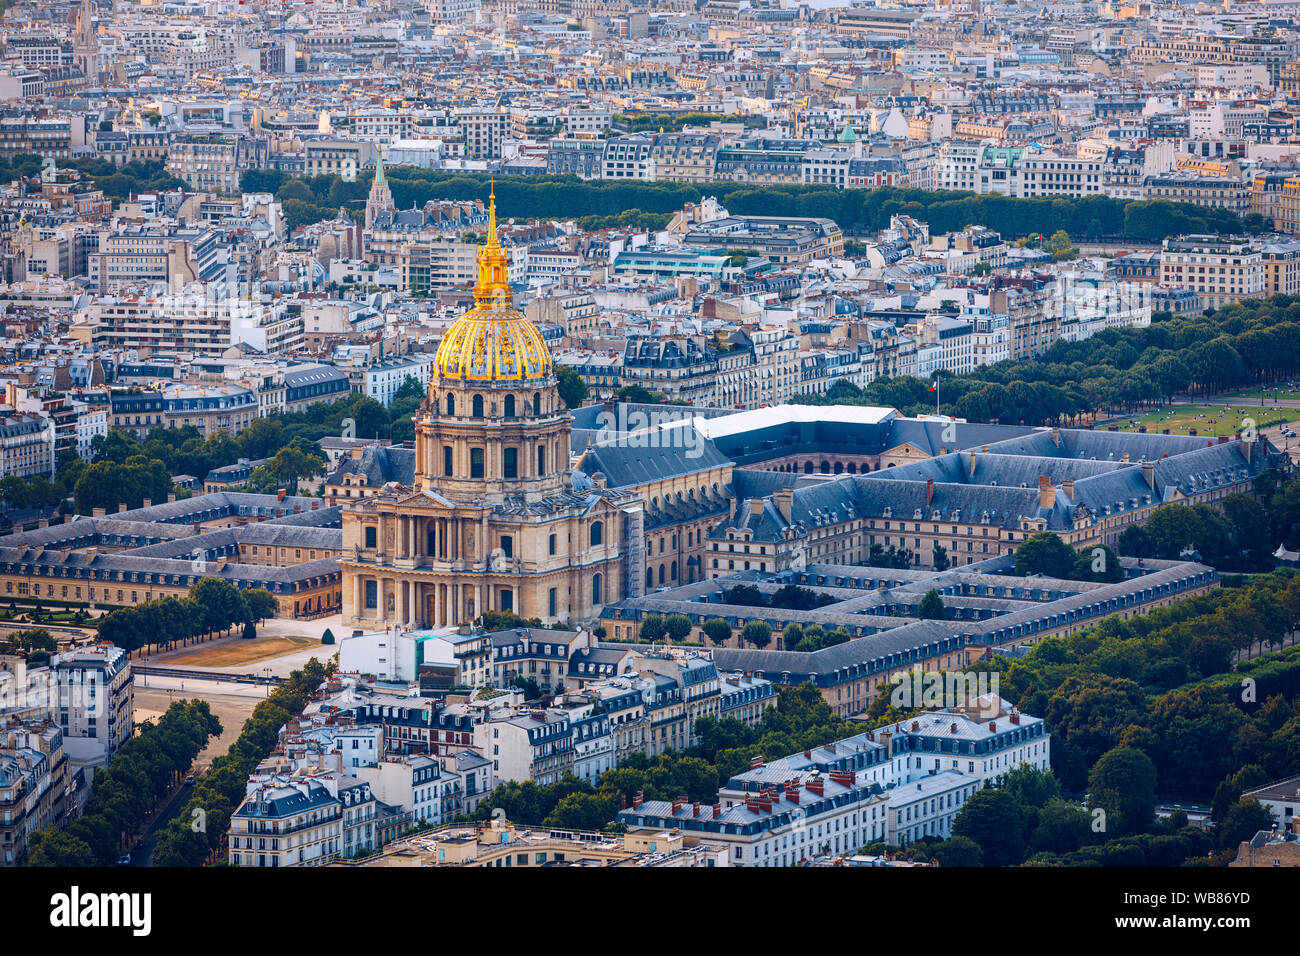 Paris aerial with Les Invalides, France. Twilight aerial view of Paris, France from Montparnasse Tower with Les Invalides building. Beautiful Les Inva Stock Photo